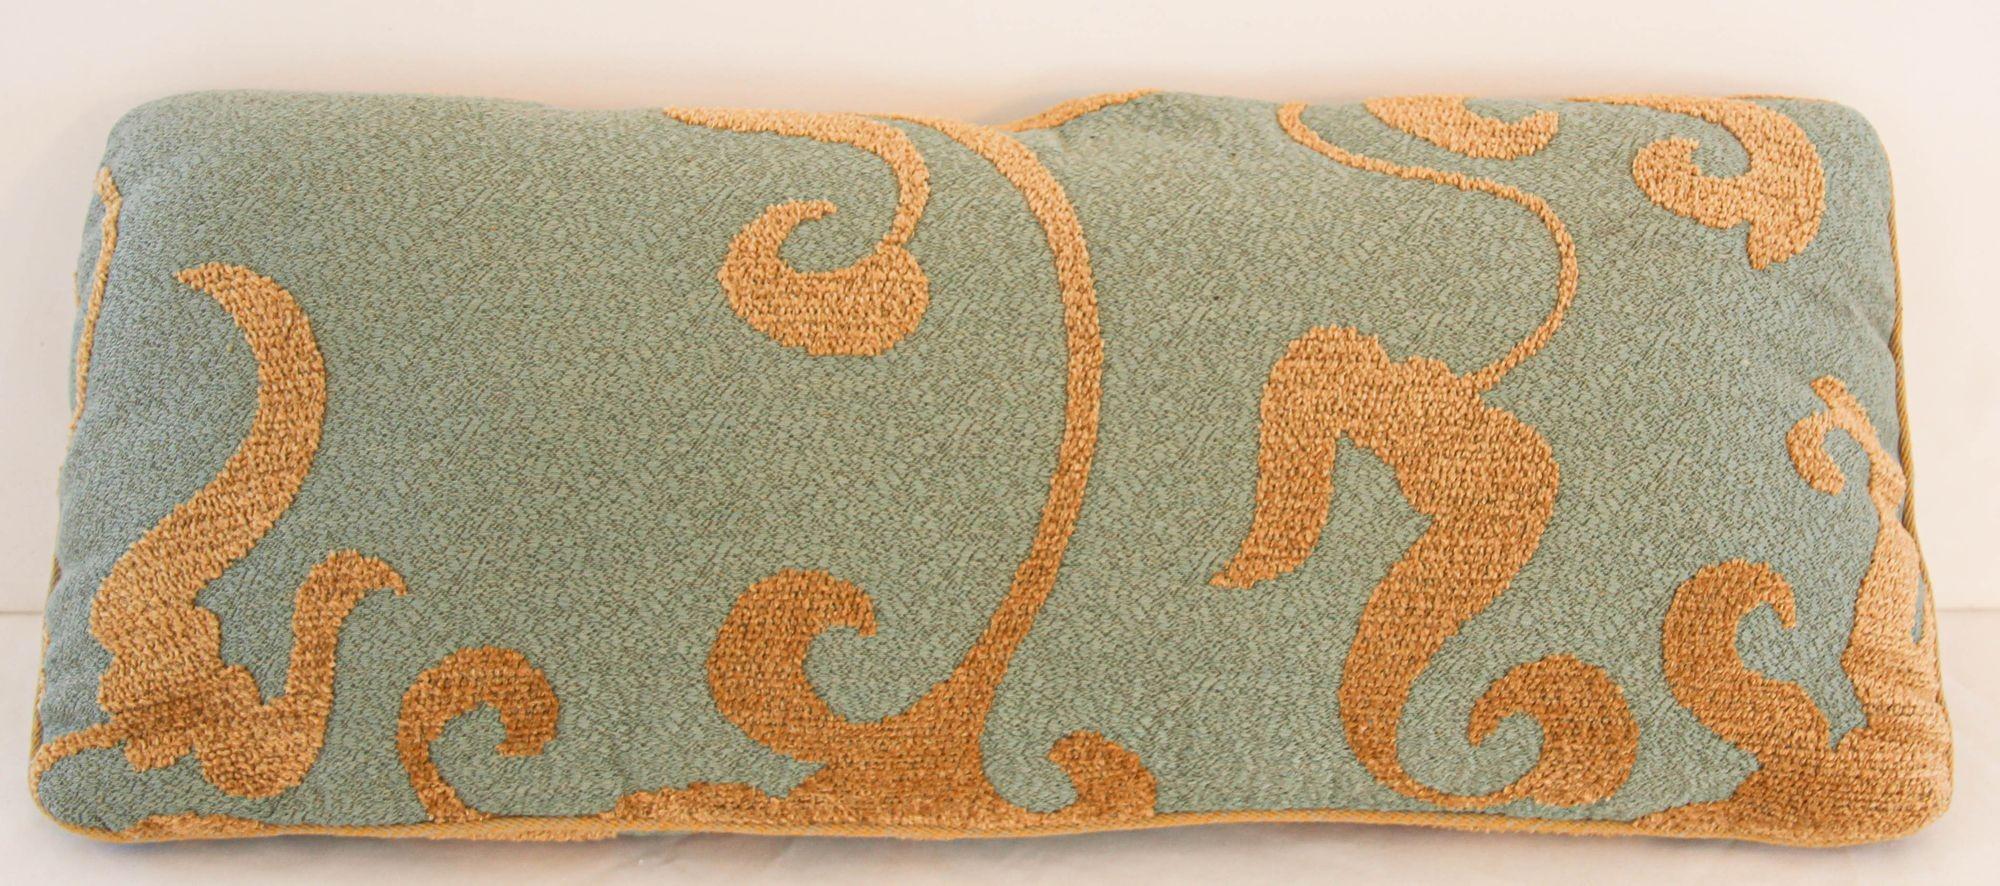 Custom made Rectangular velvet lumbar pillow light sea blue with gold.
Rectangular Lumbar Teal Blue Pillow Modern design Chenille fabric.
Piped border and gold floral on luxurious chenille fabric.
This throw pillow features a stylized swirling fern